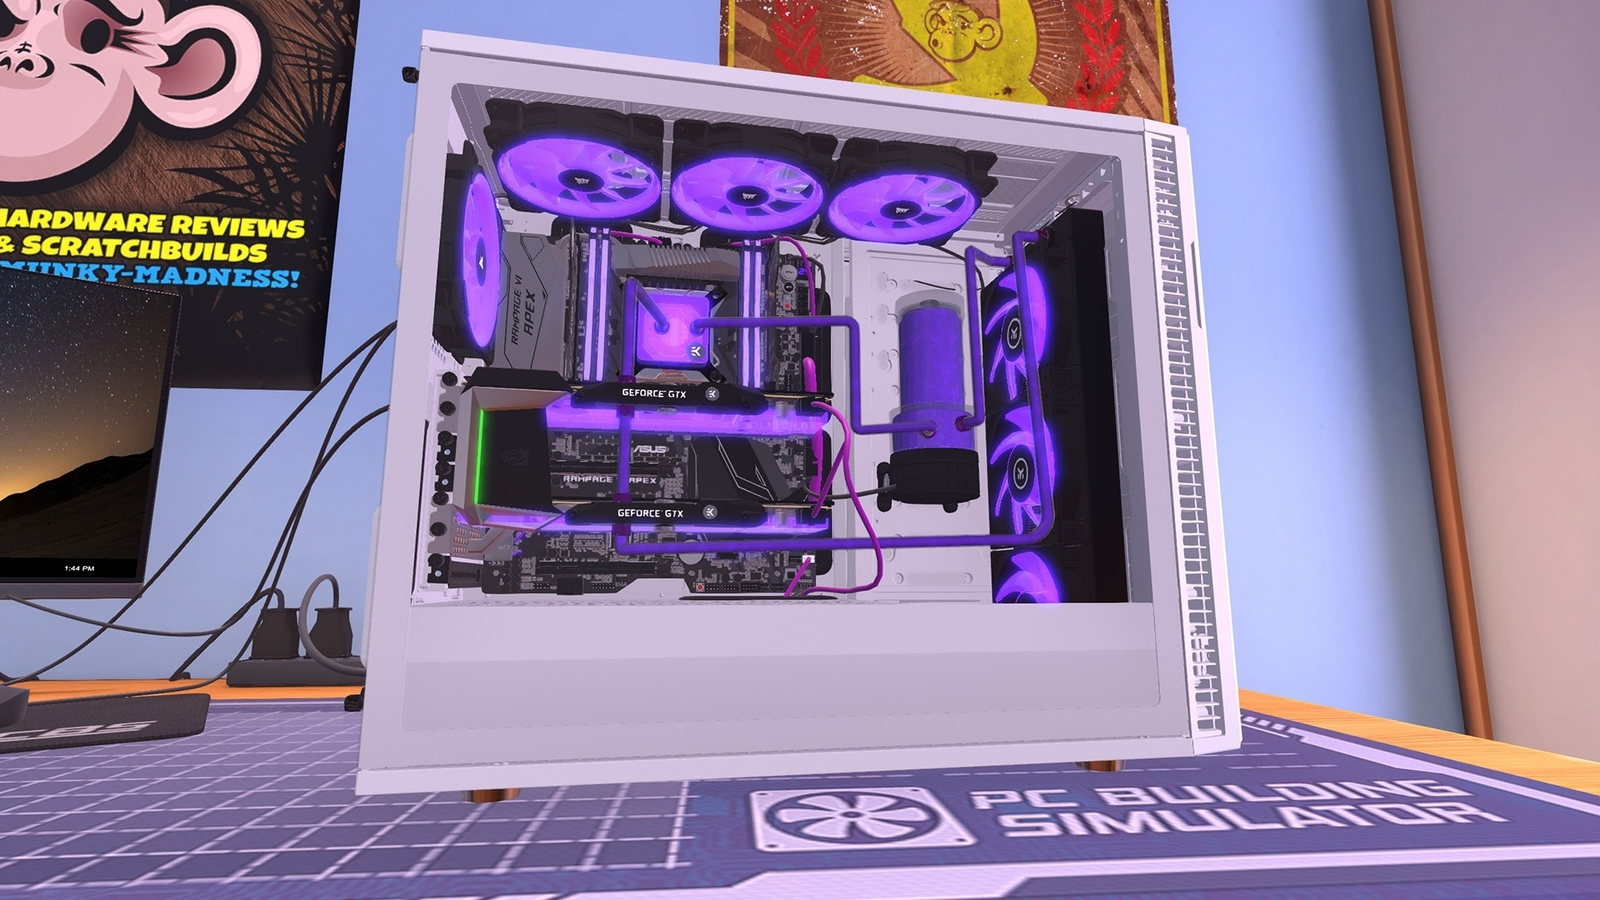 Over 4 million people claim PC Building Simulator free from the